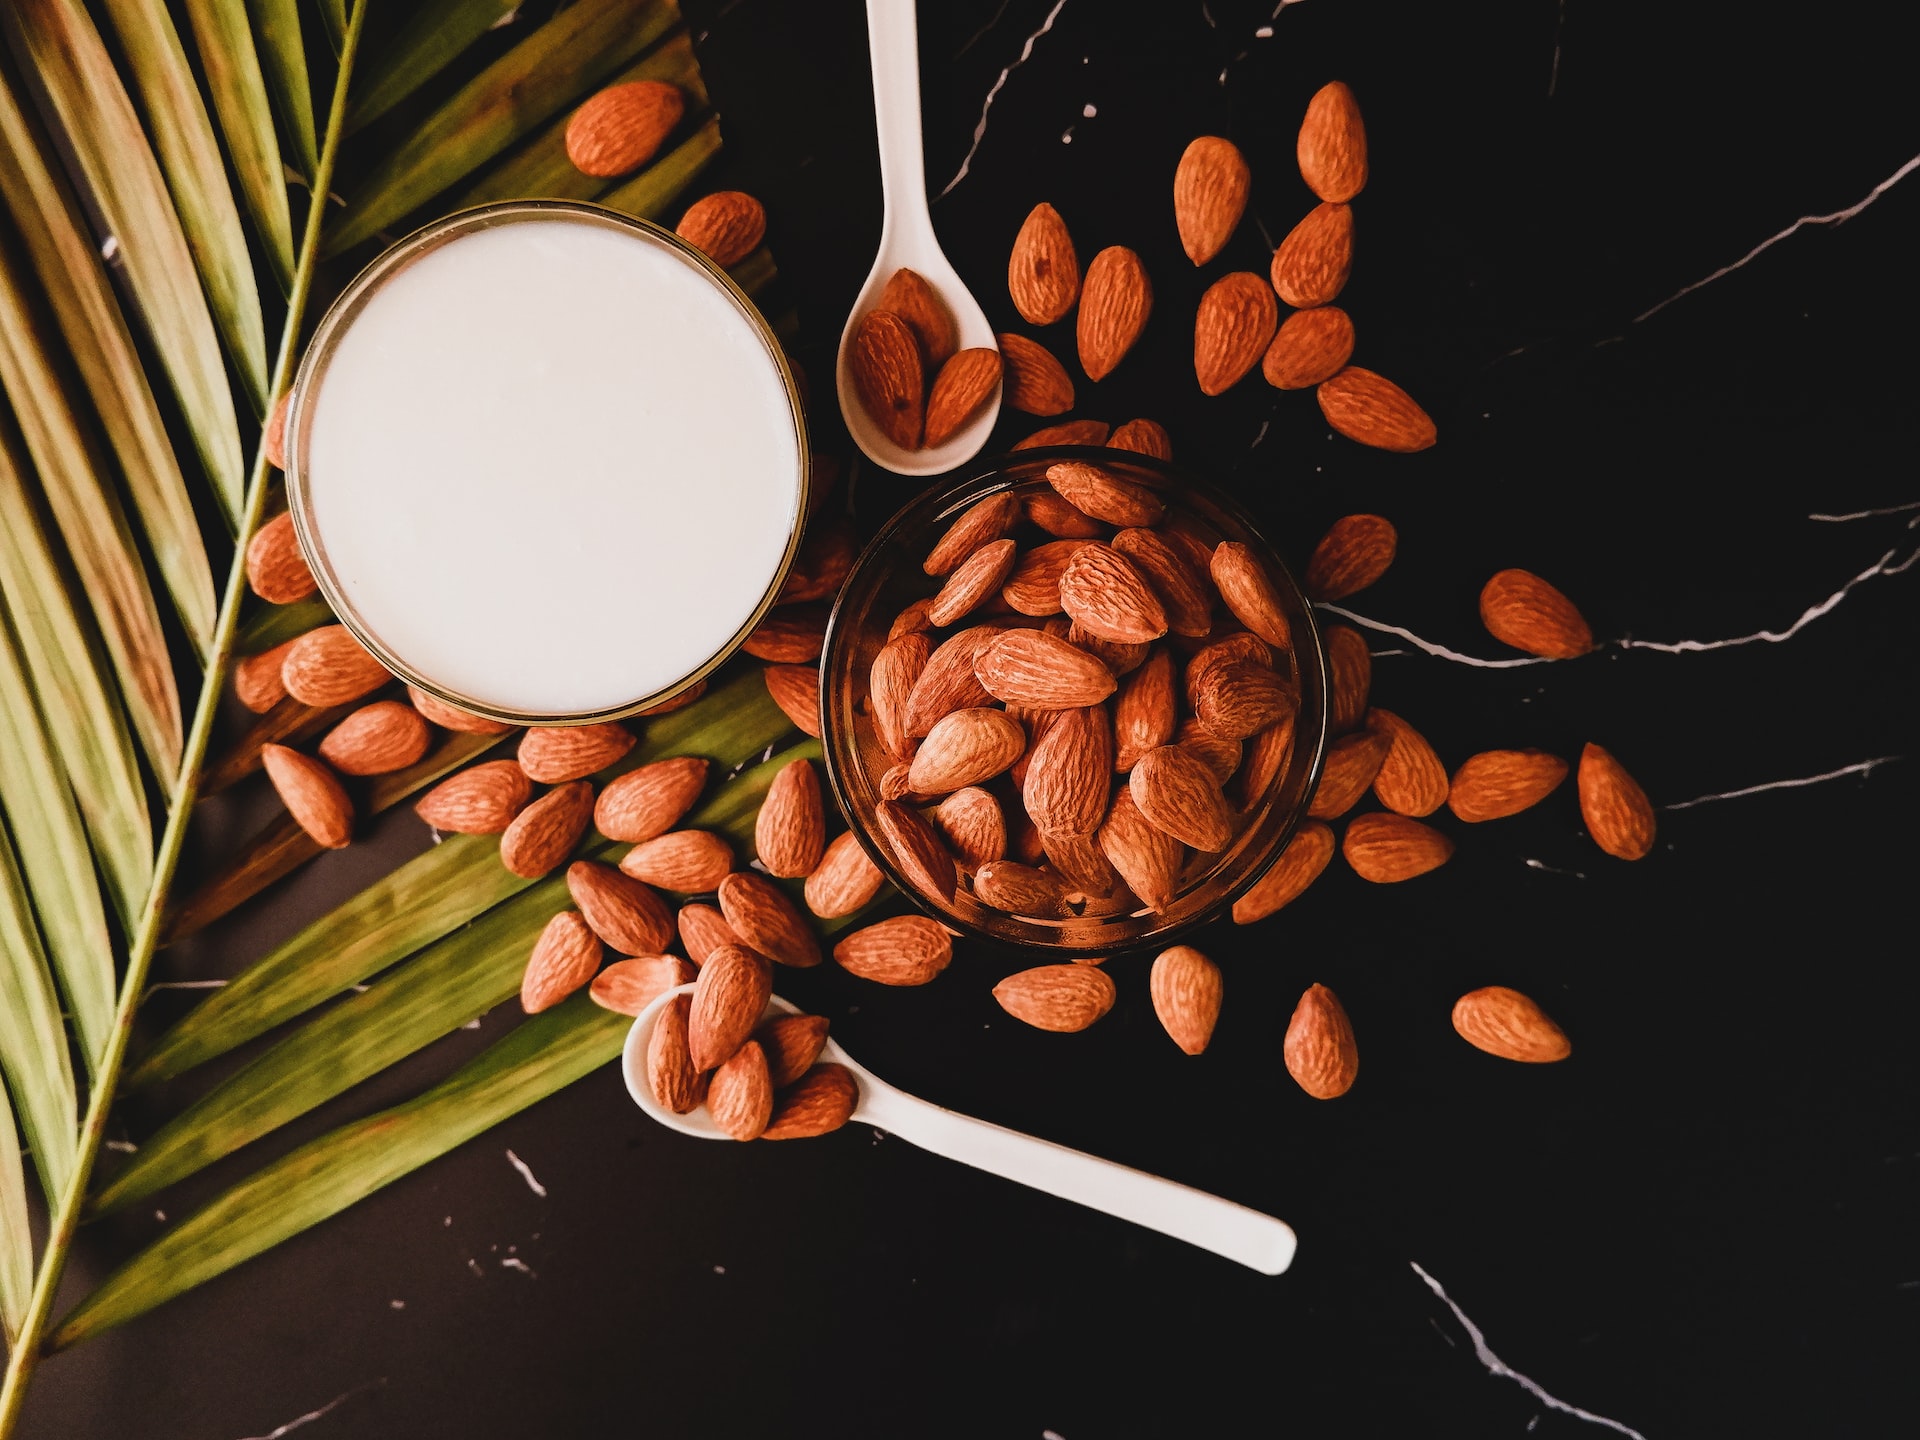 Bad News for Almond Milk Drinkers